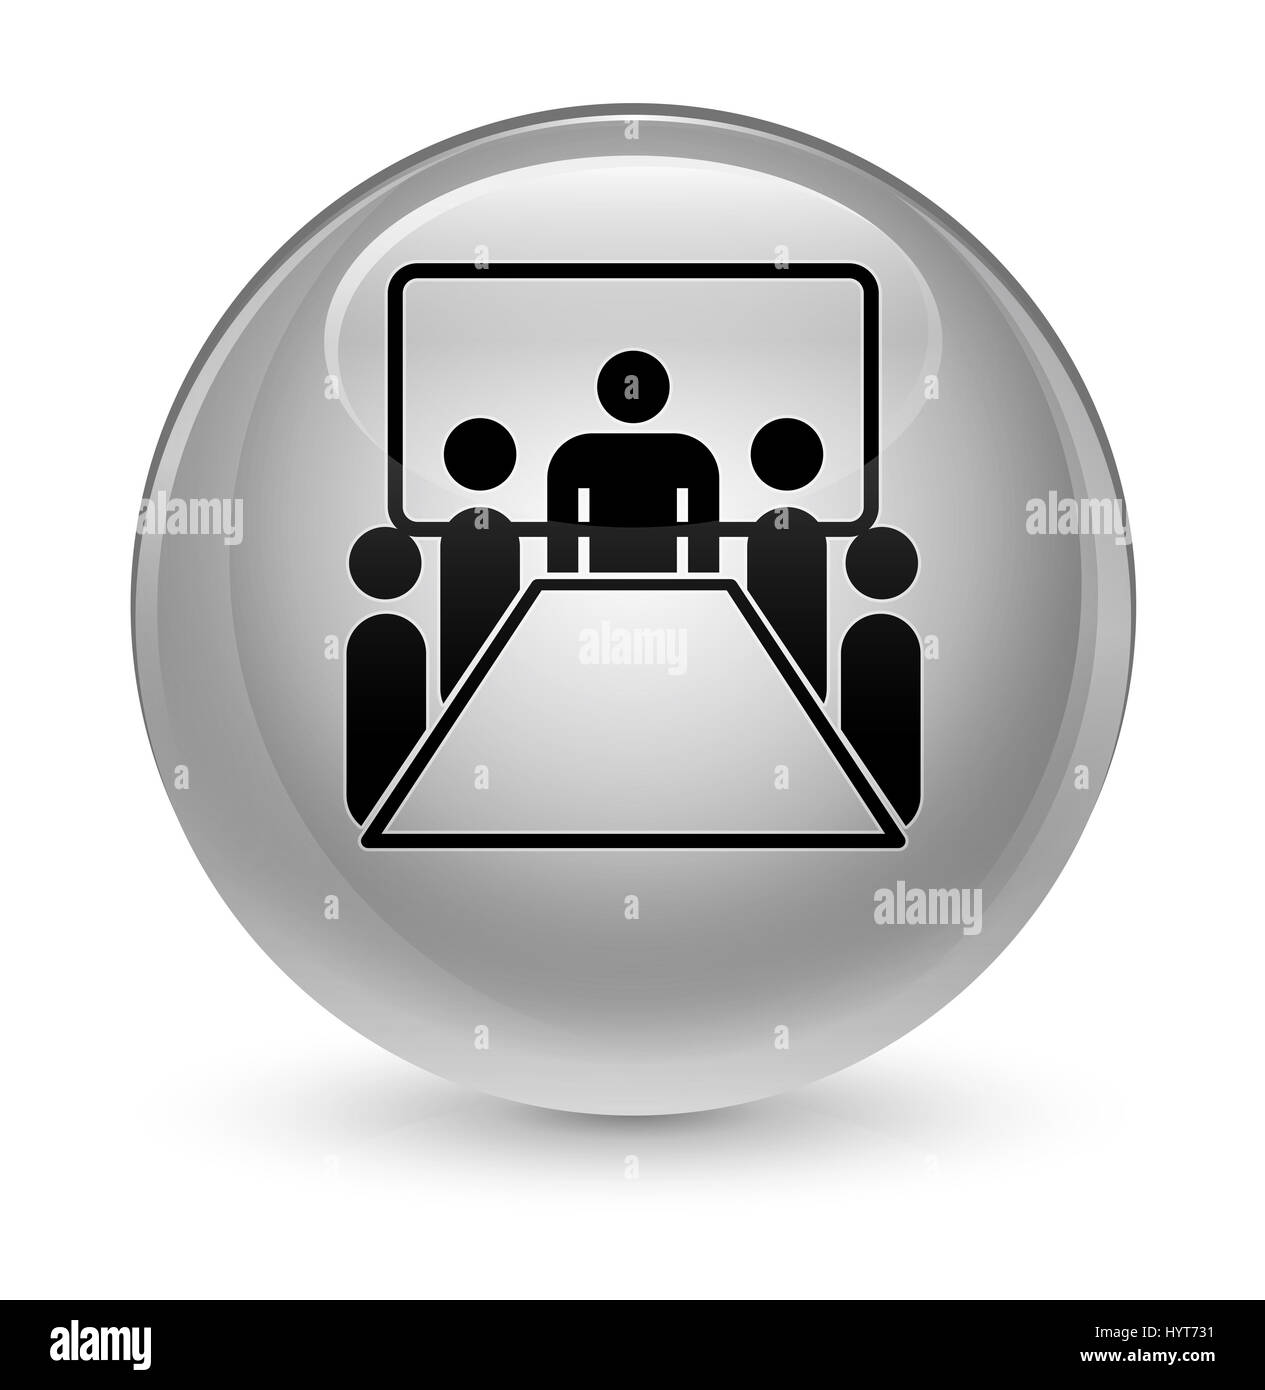 Meeting room icon isolated on glassy white round button abstract illustration Stock Photo